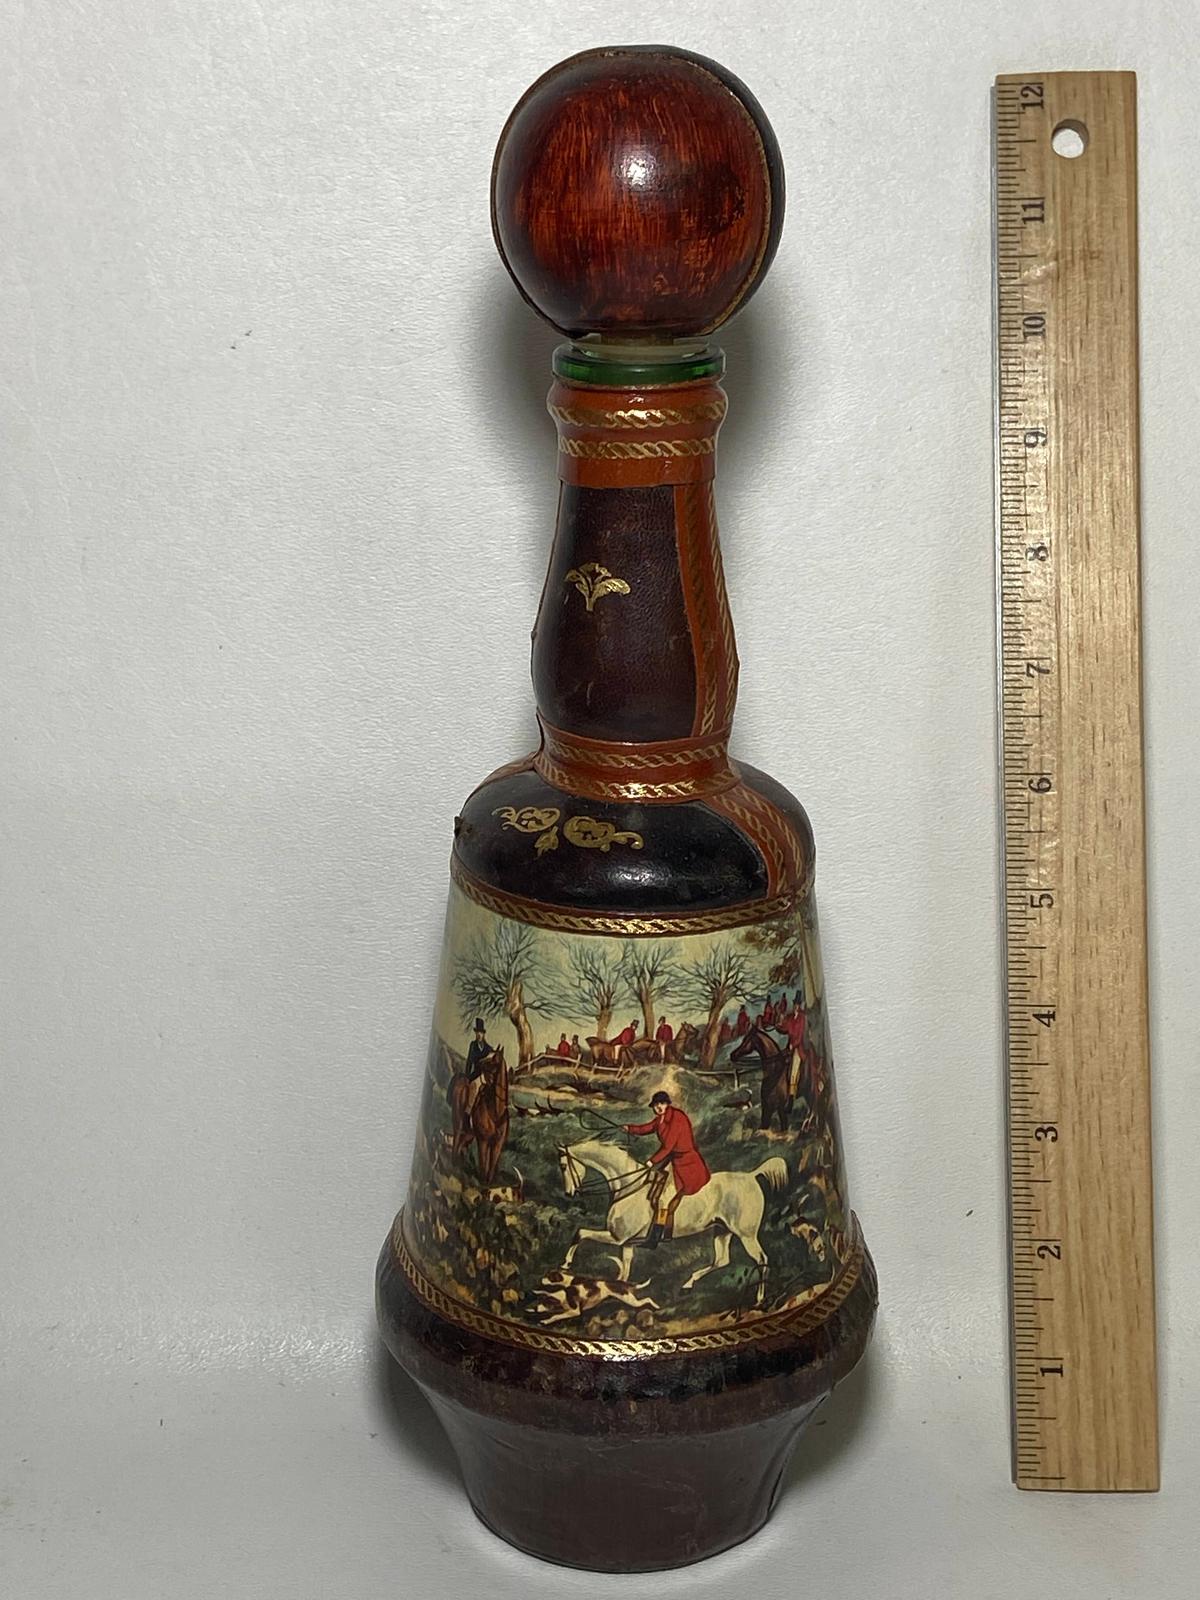 Unique Leather Wrapped Glass Decanter w/ English Hunting Scene Decal 